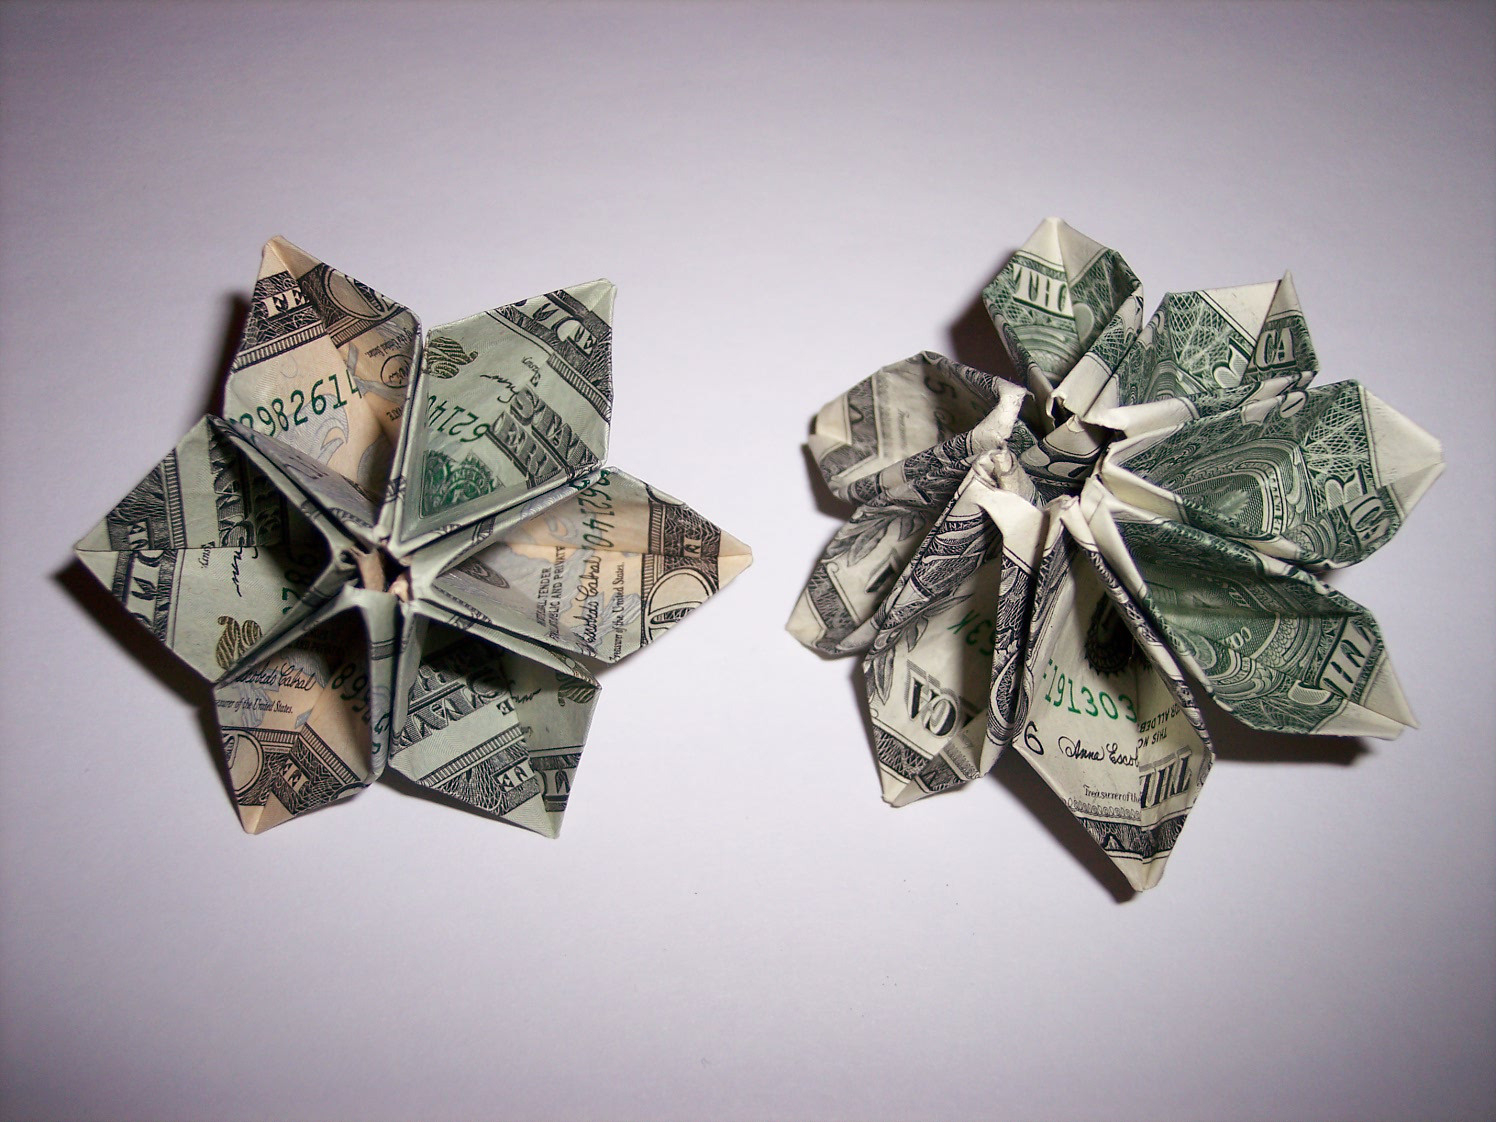 How To Make An Origami Rose Out Of Money Origami Dollar Bill Flower Embroidery Origami Easy Dollar Bill